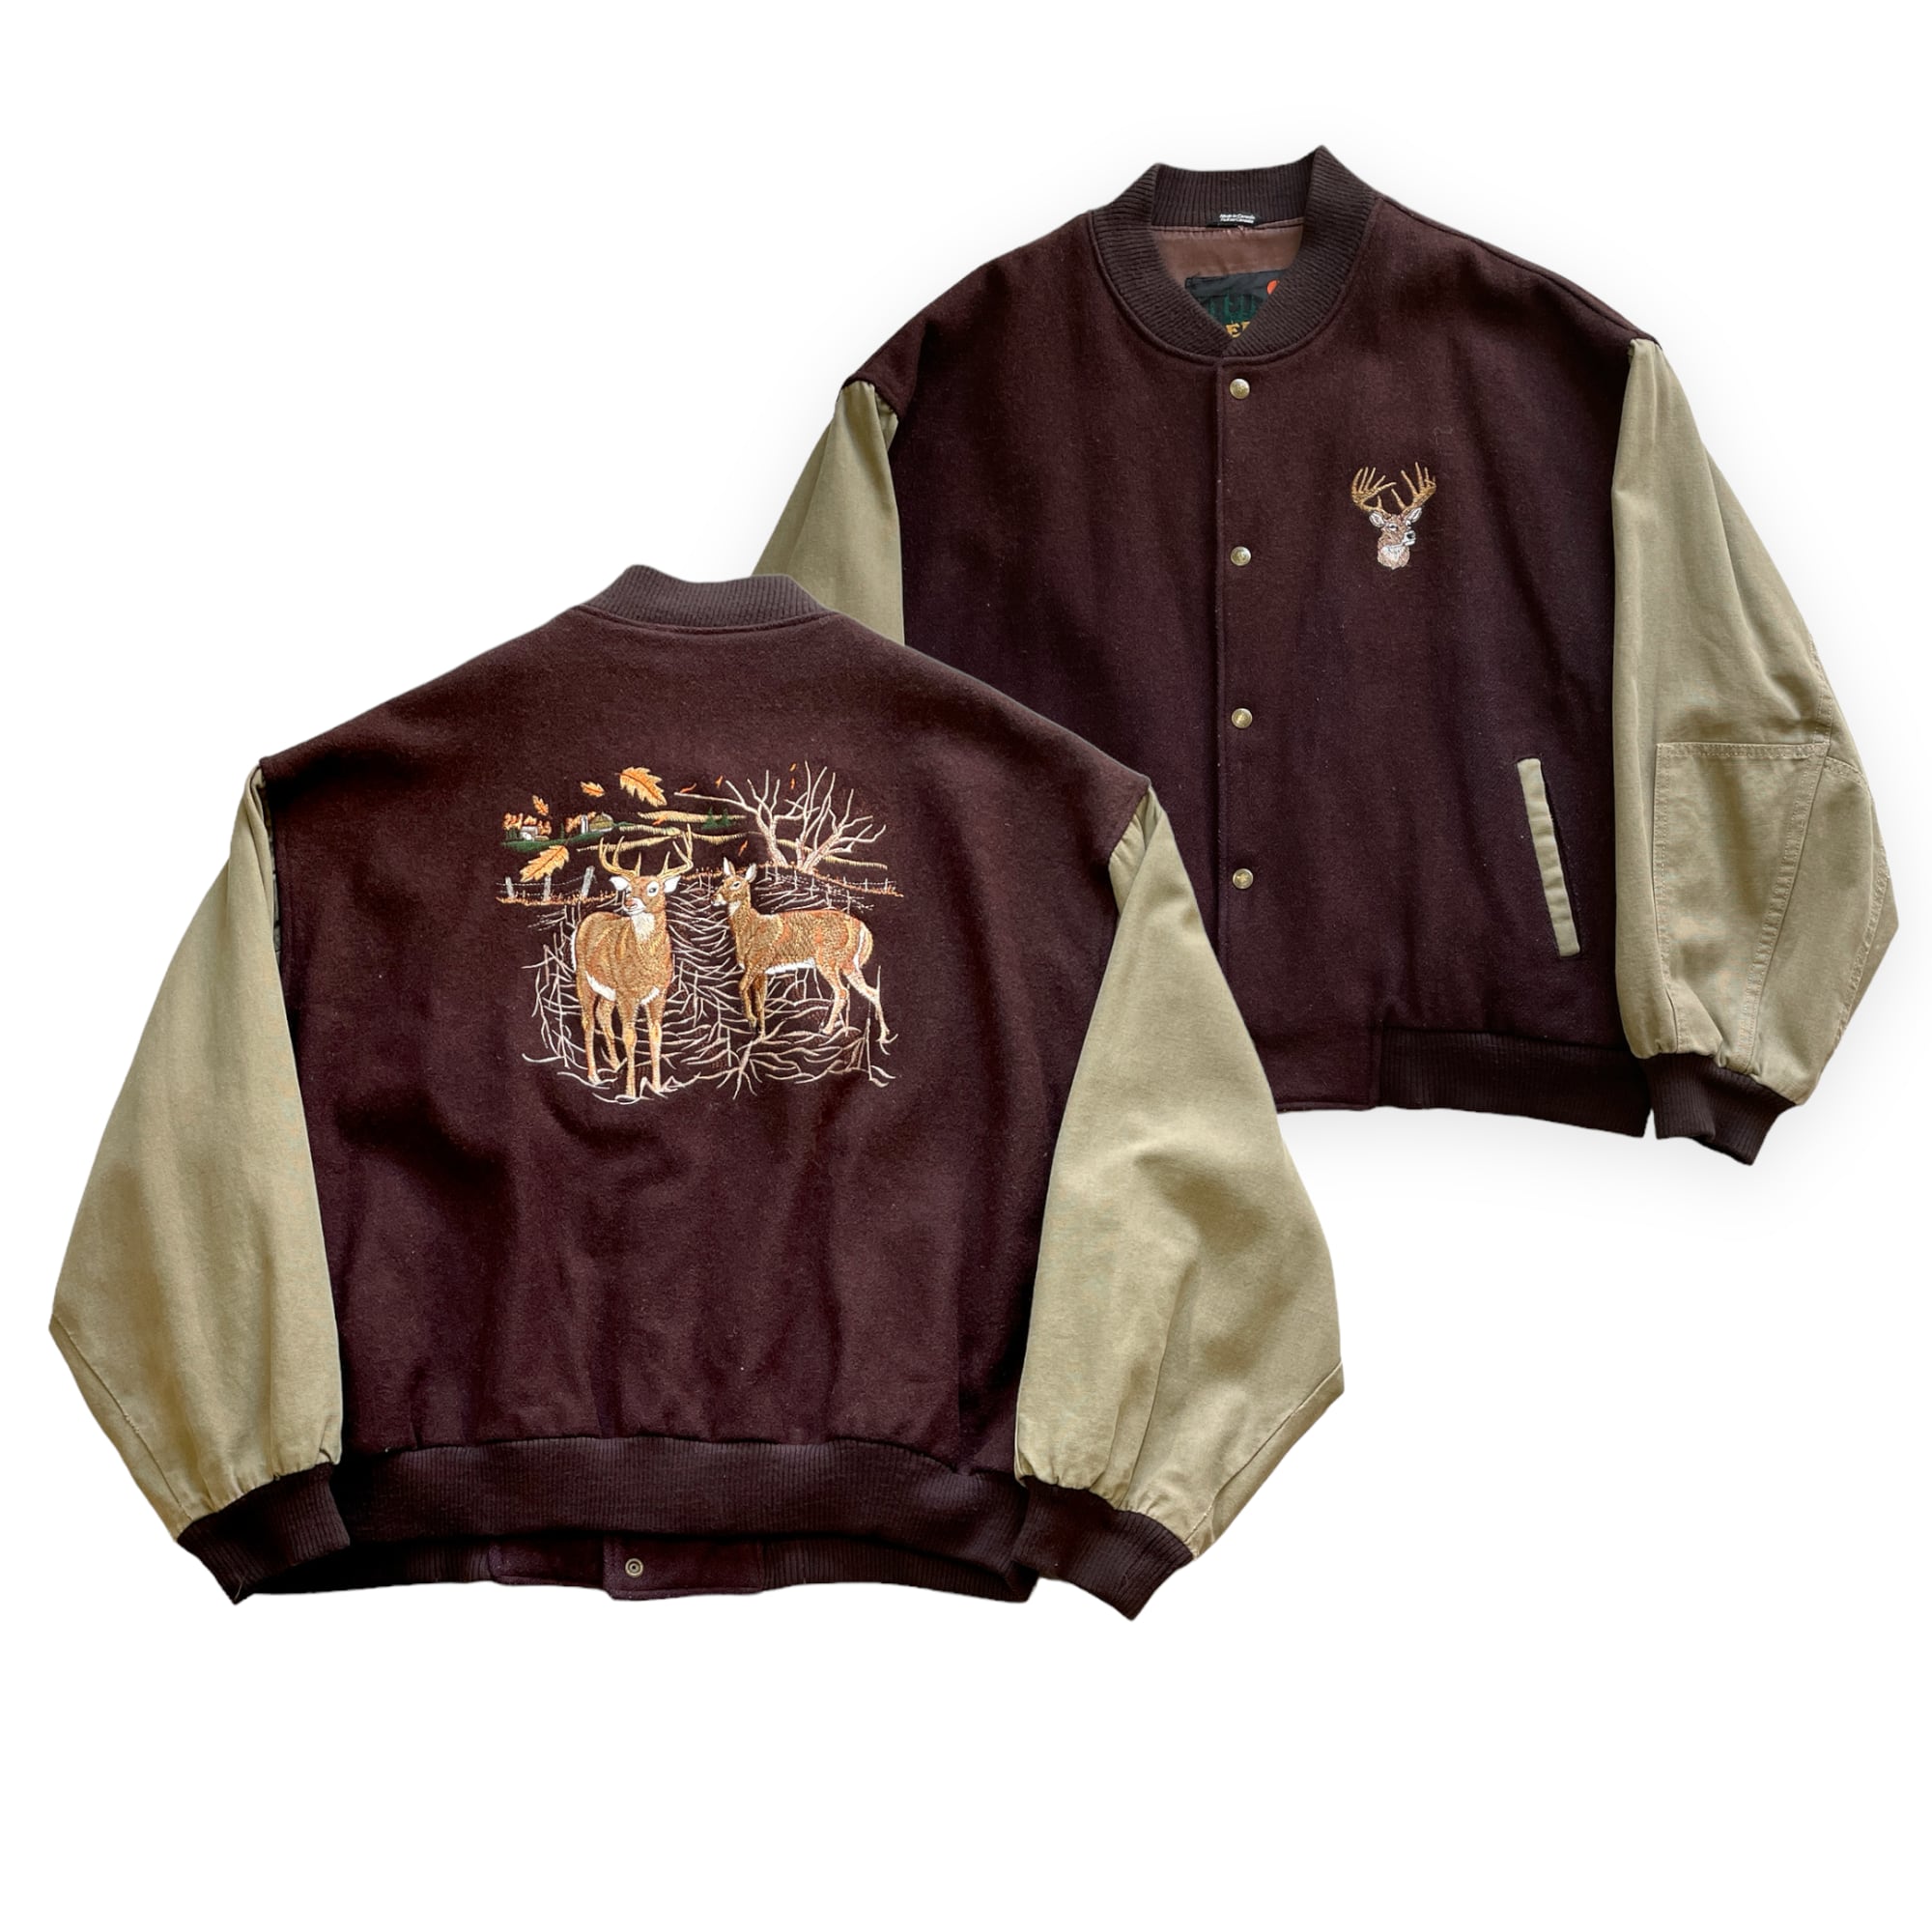 【ACUBI CLUB】D embroidery jumper